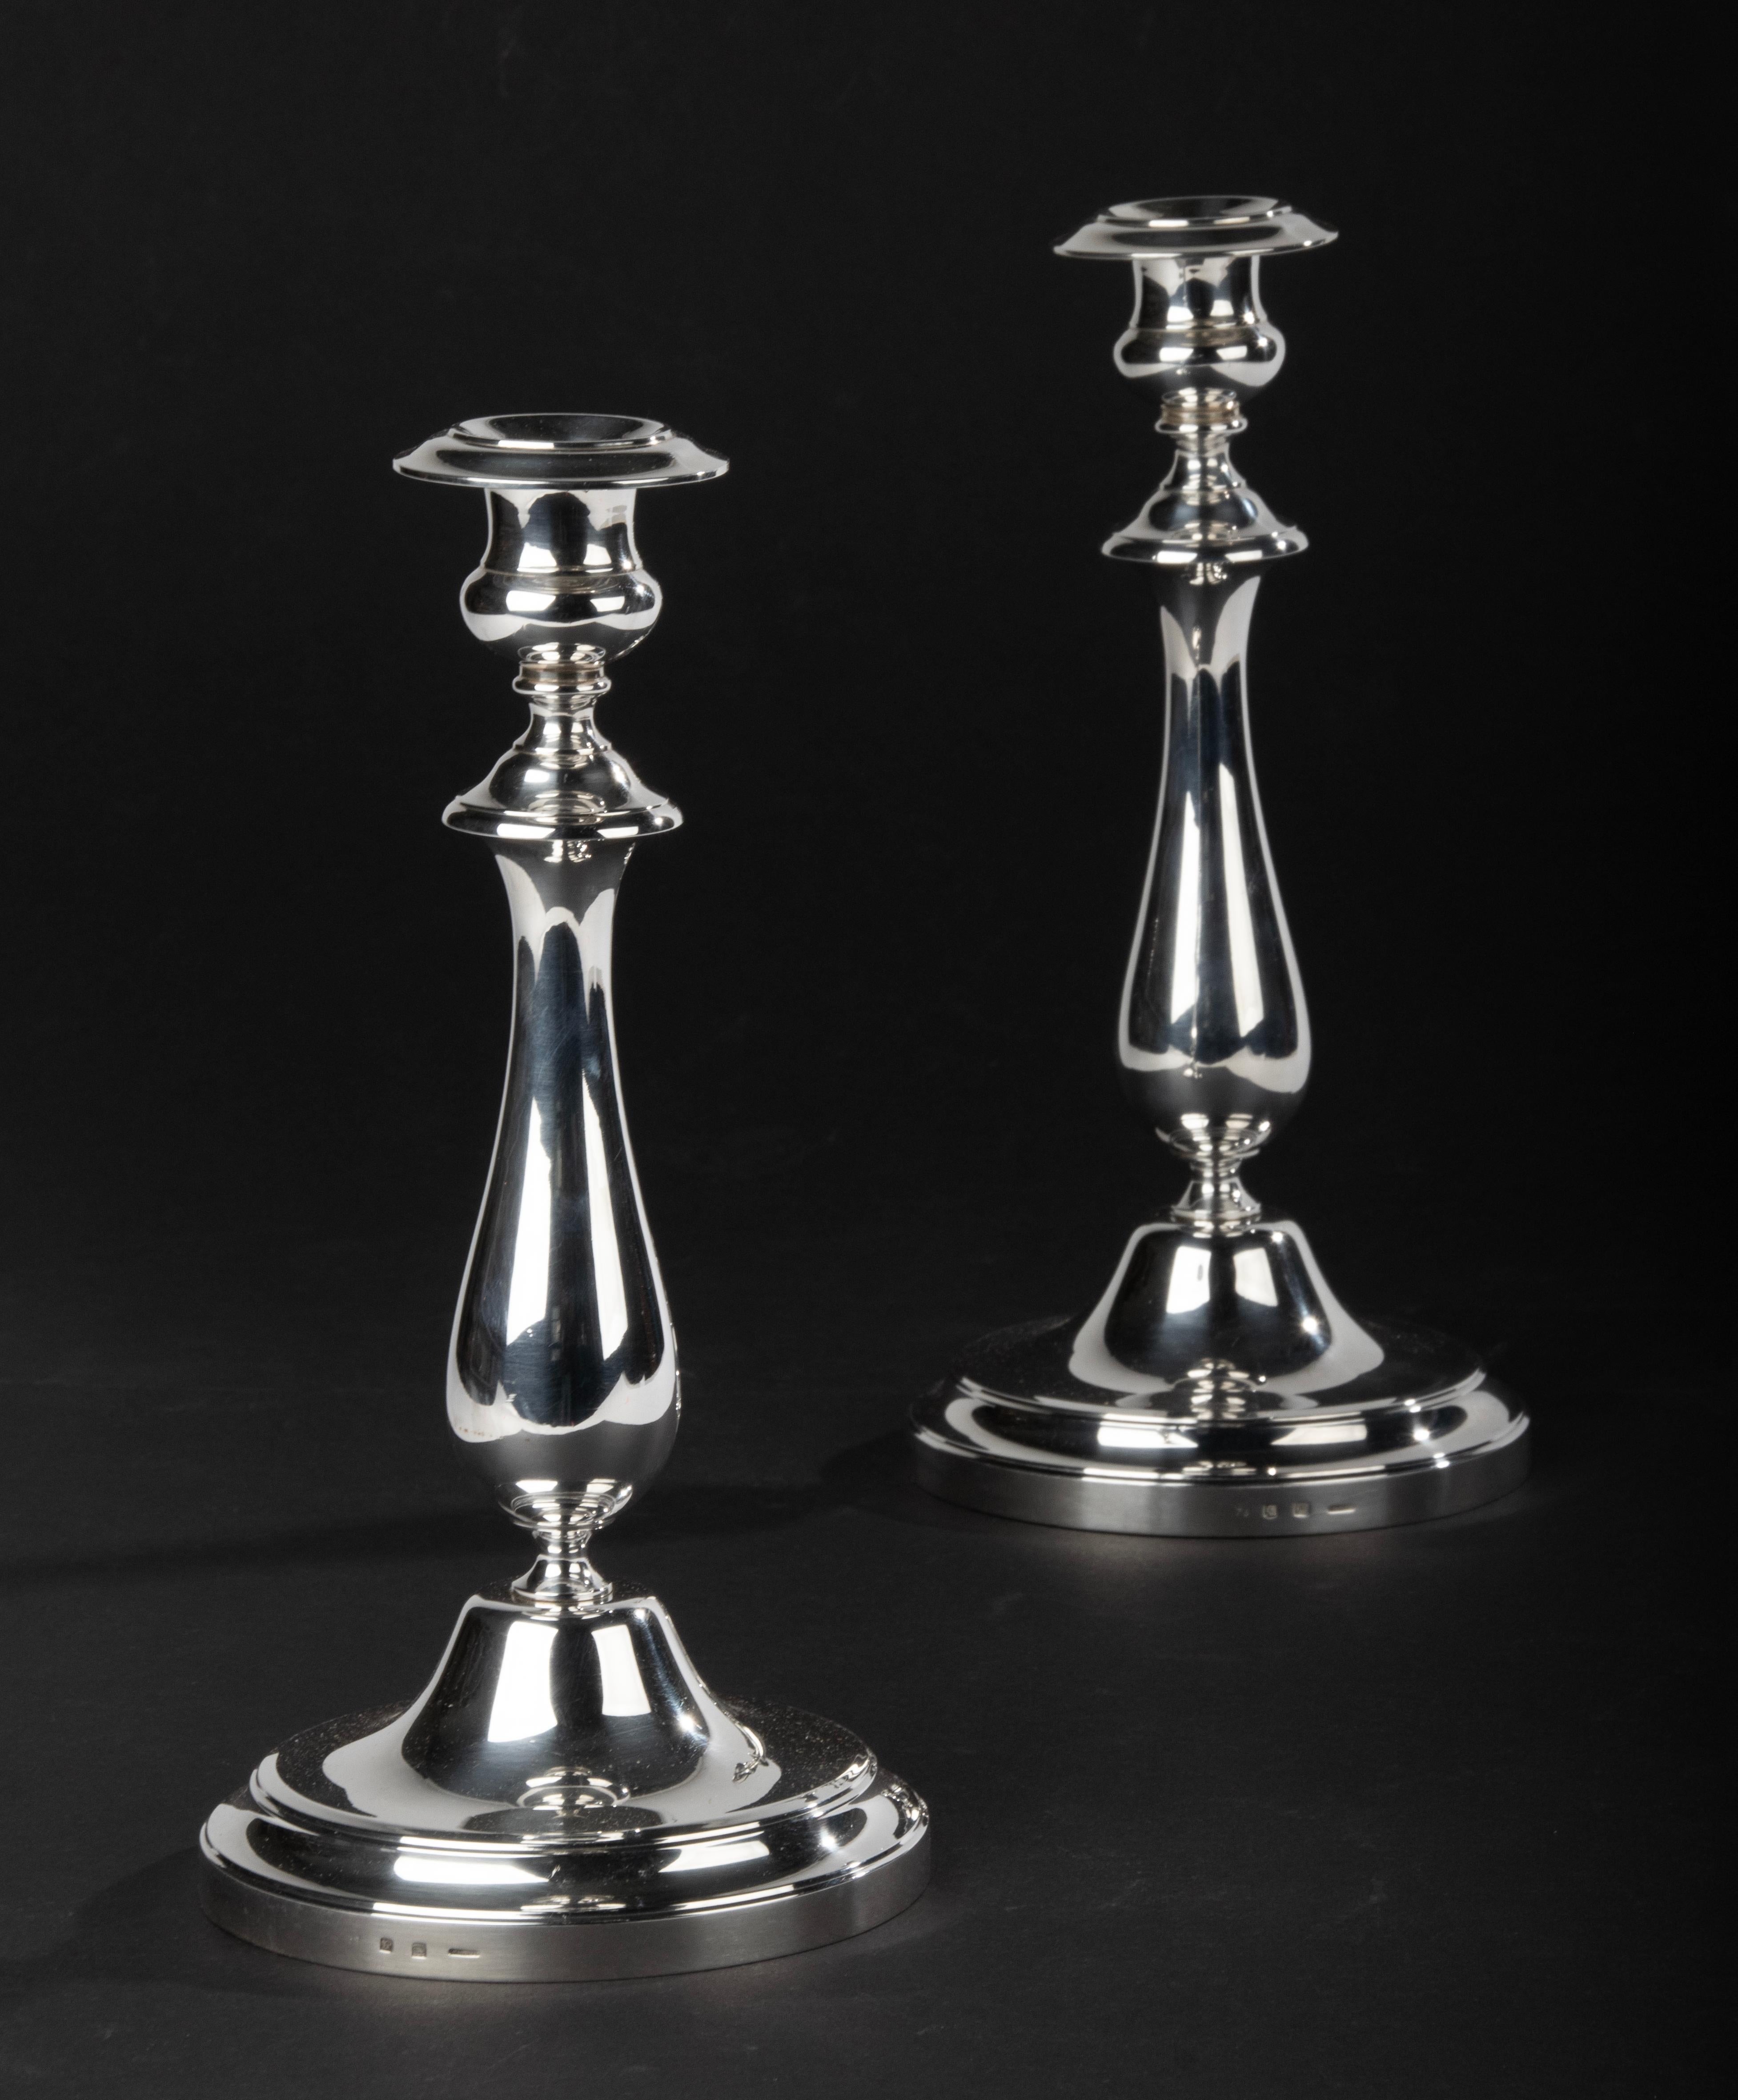 A Pair of Modern Classic Silver Plated Candlesticks made by Christofle France 4